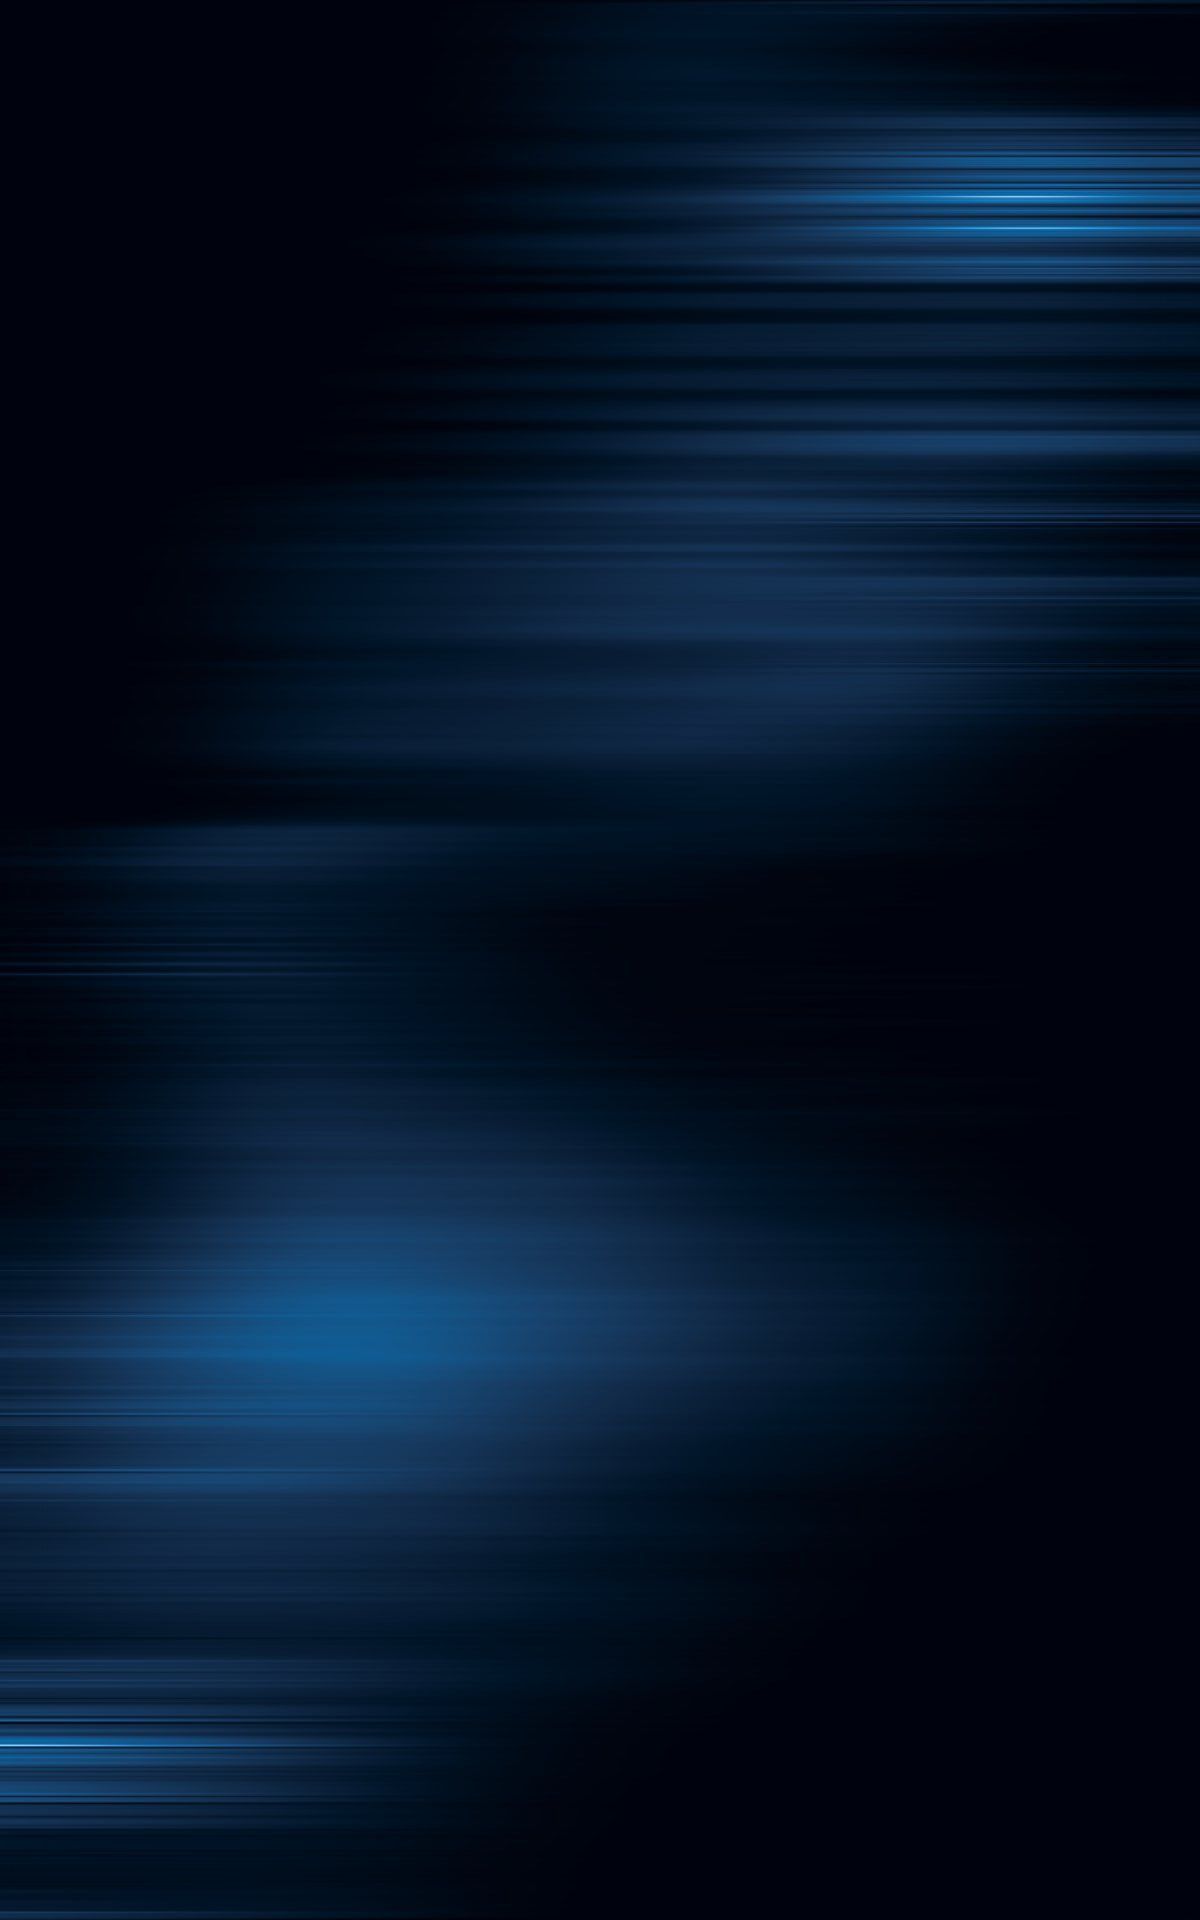 Black and Blue iPhone Wallpaper Free Black and Blue iPhone Background